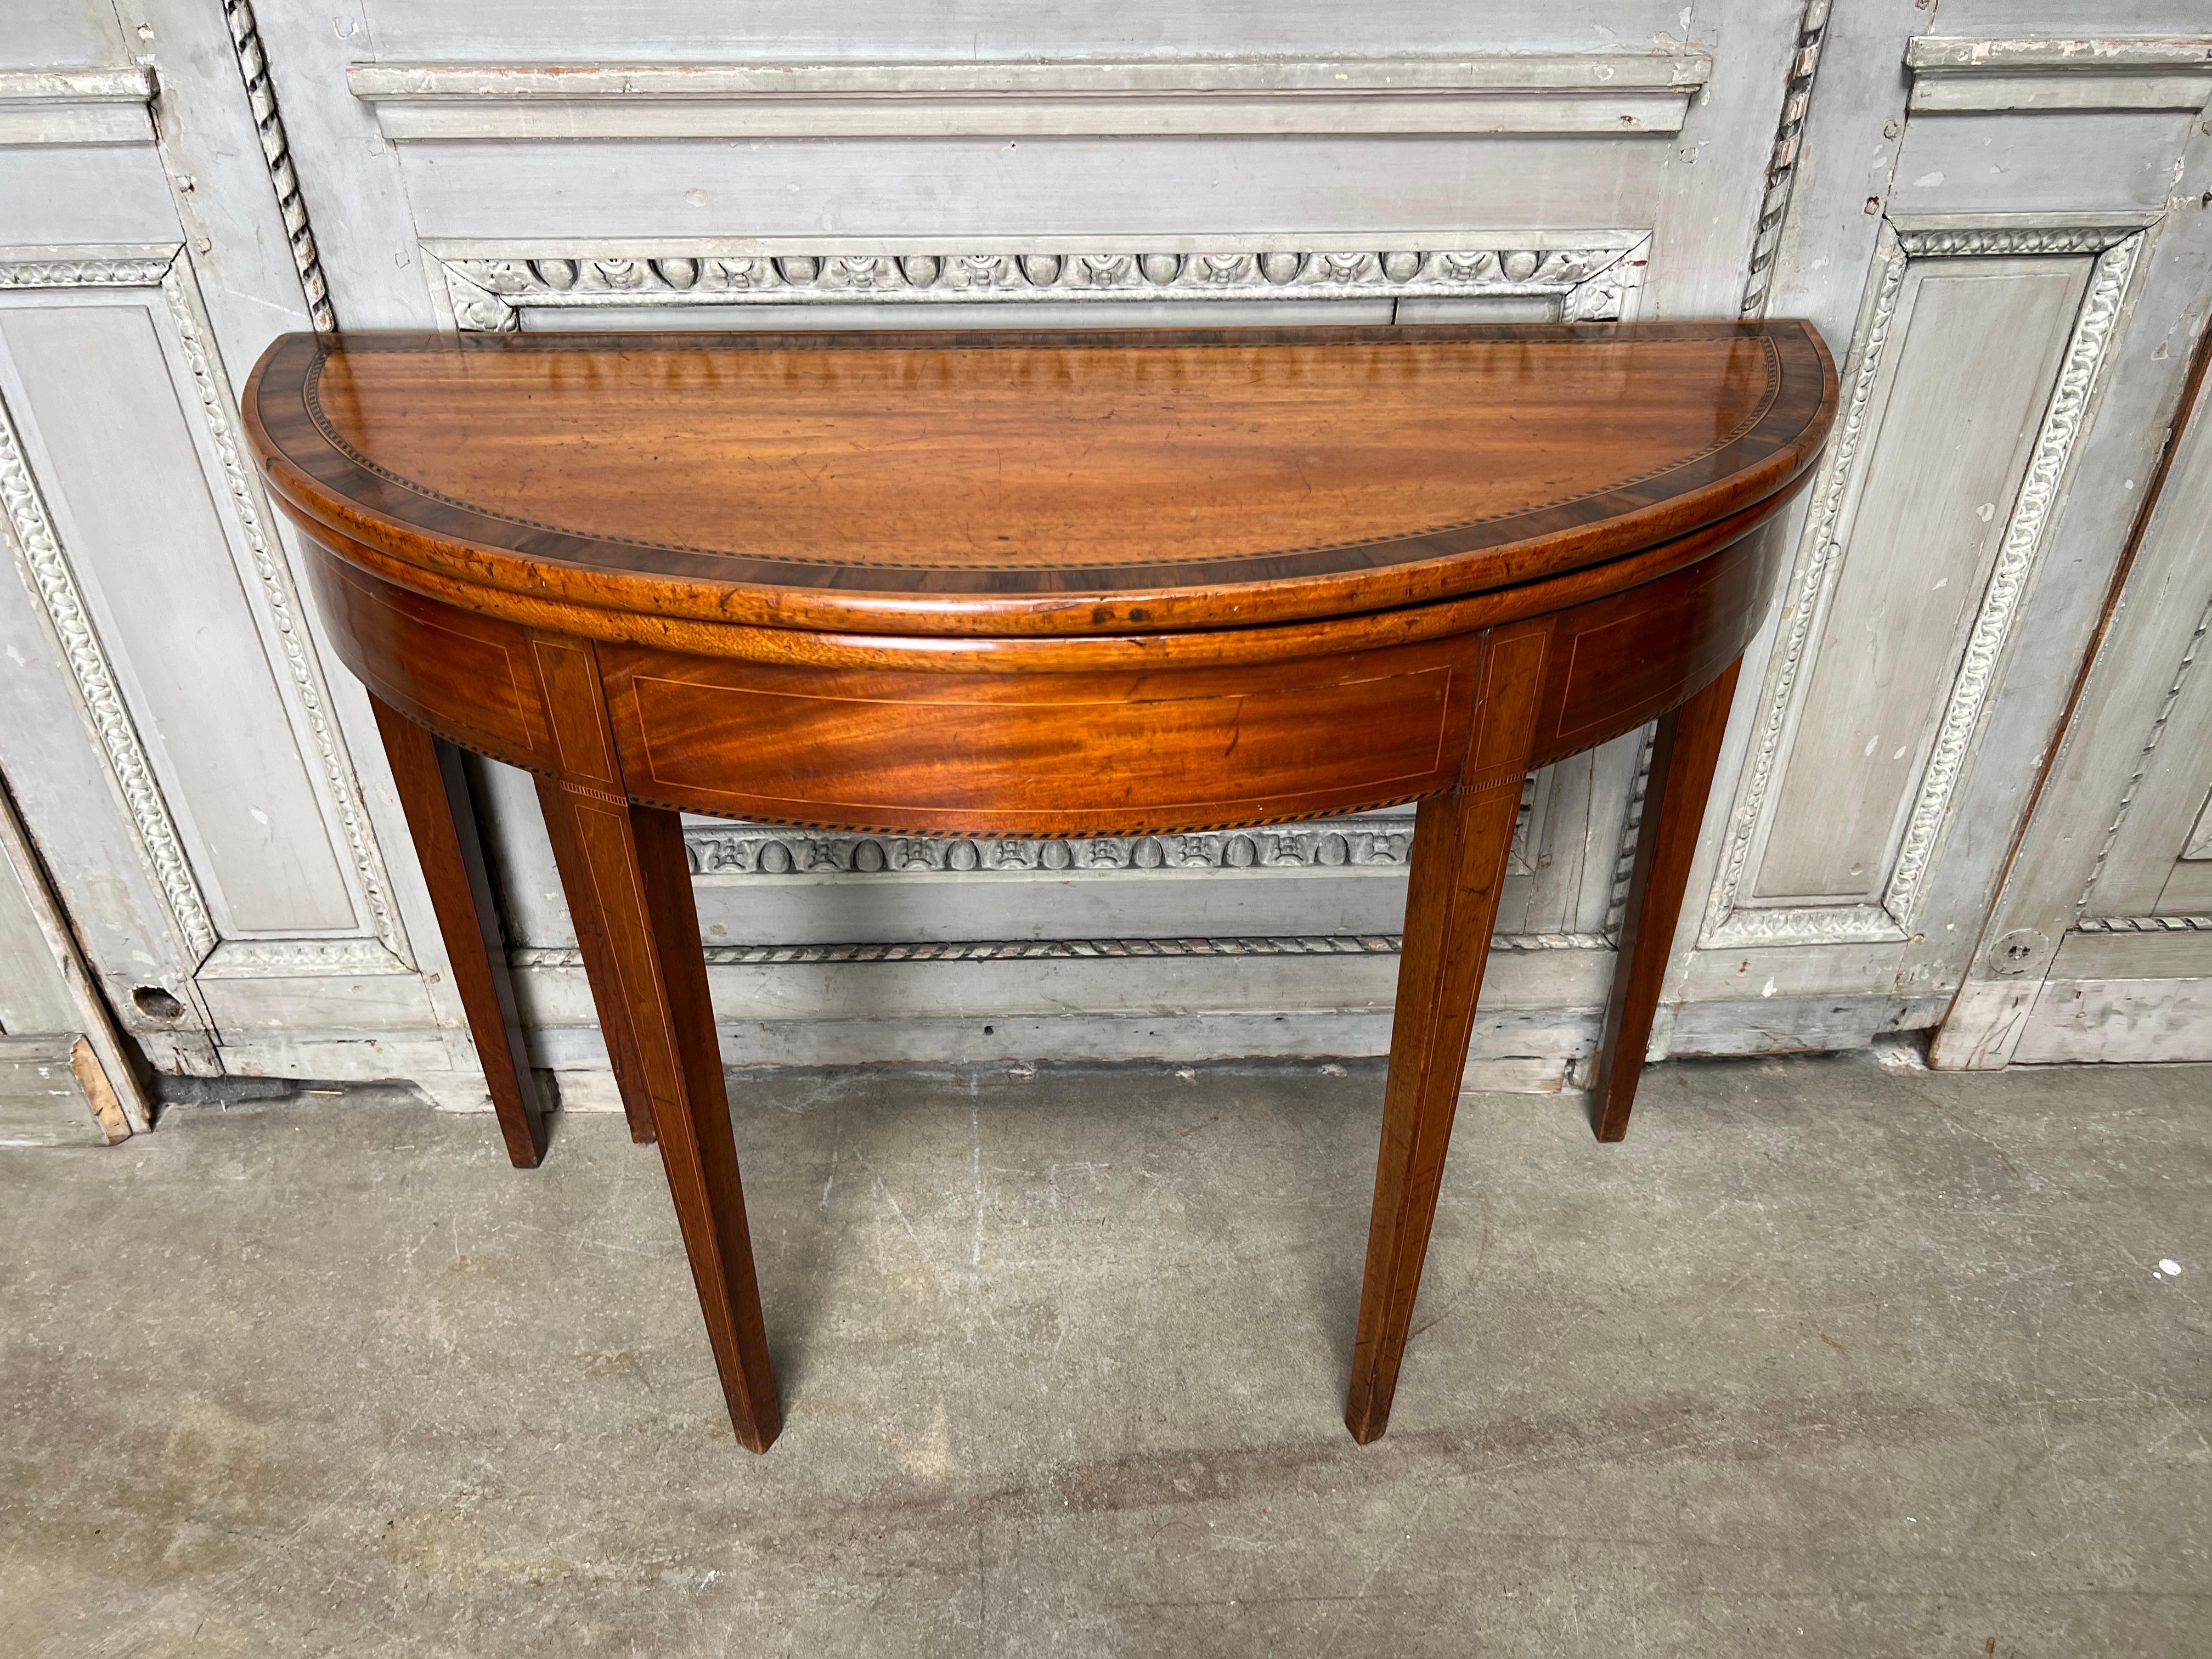 An English George III mahogany demi-lune gate leg game table with a lovely old patina and color.  This small scaled demi-lune is a perfect cosole in a small tight spot and would be very useful for extra seating during a party.  